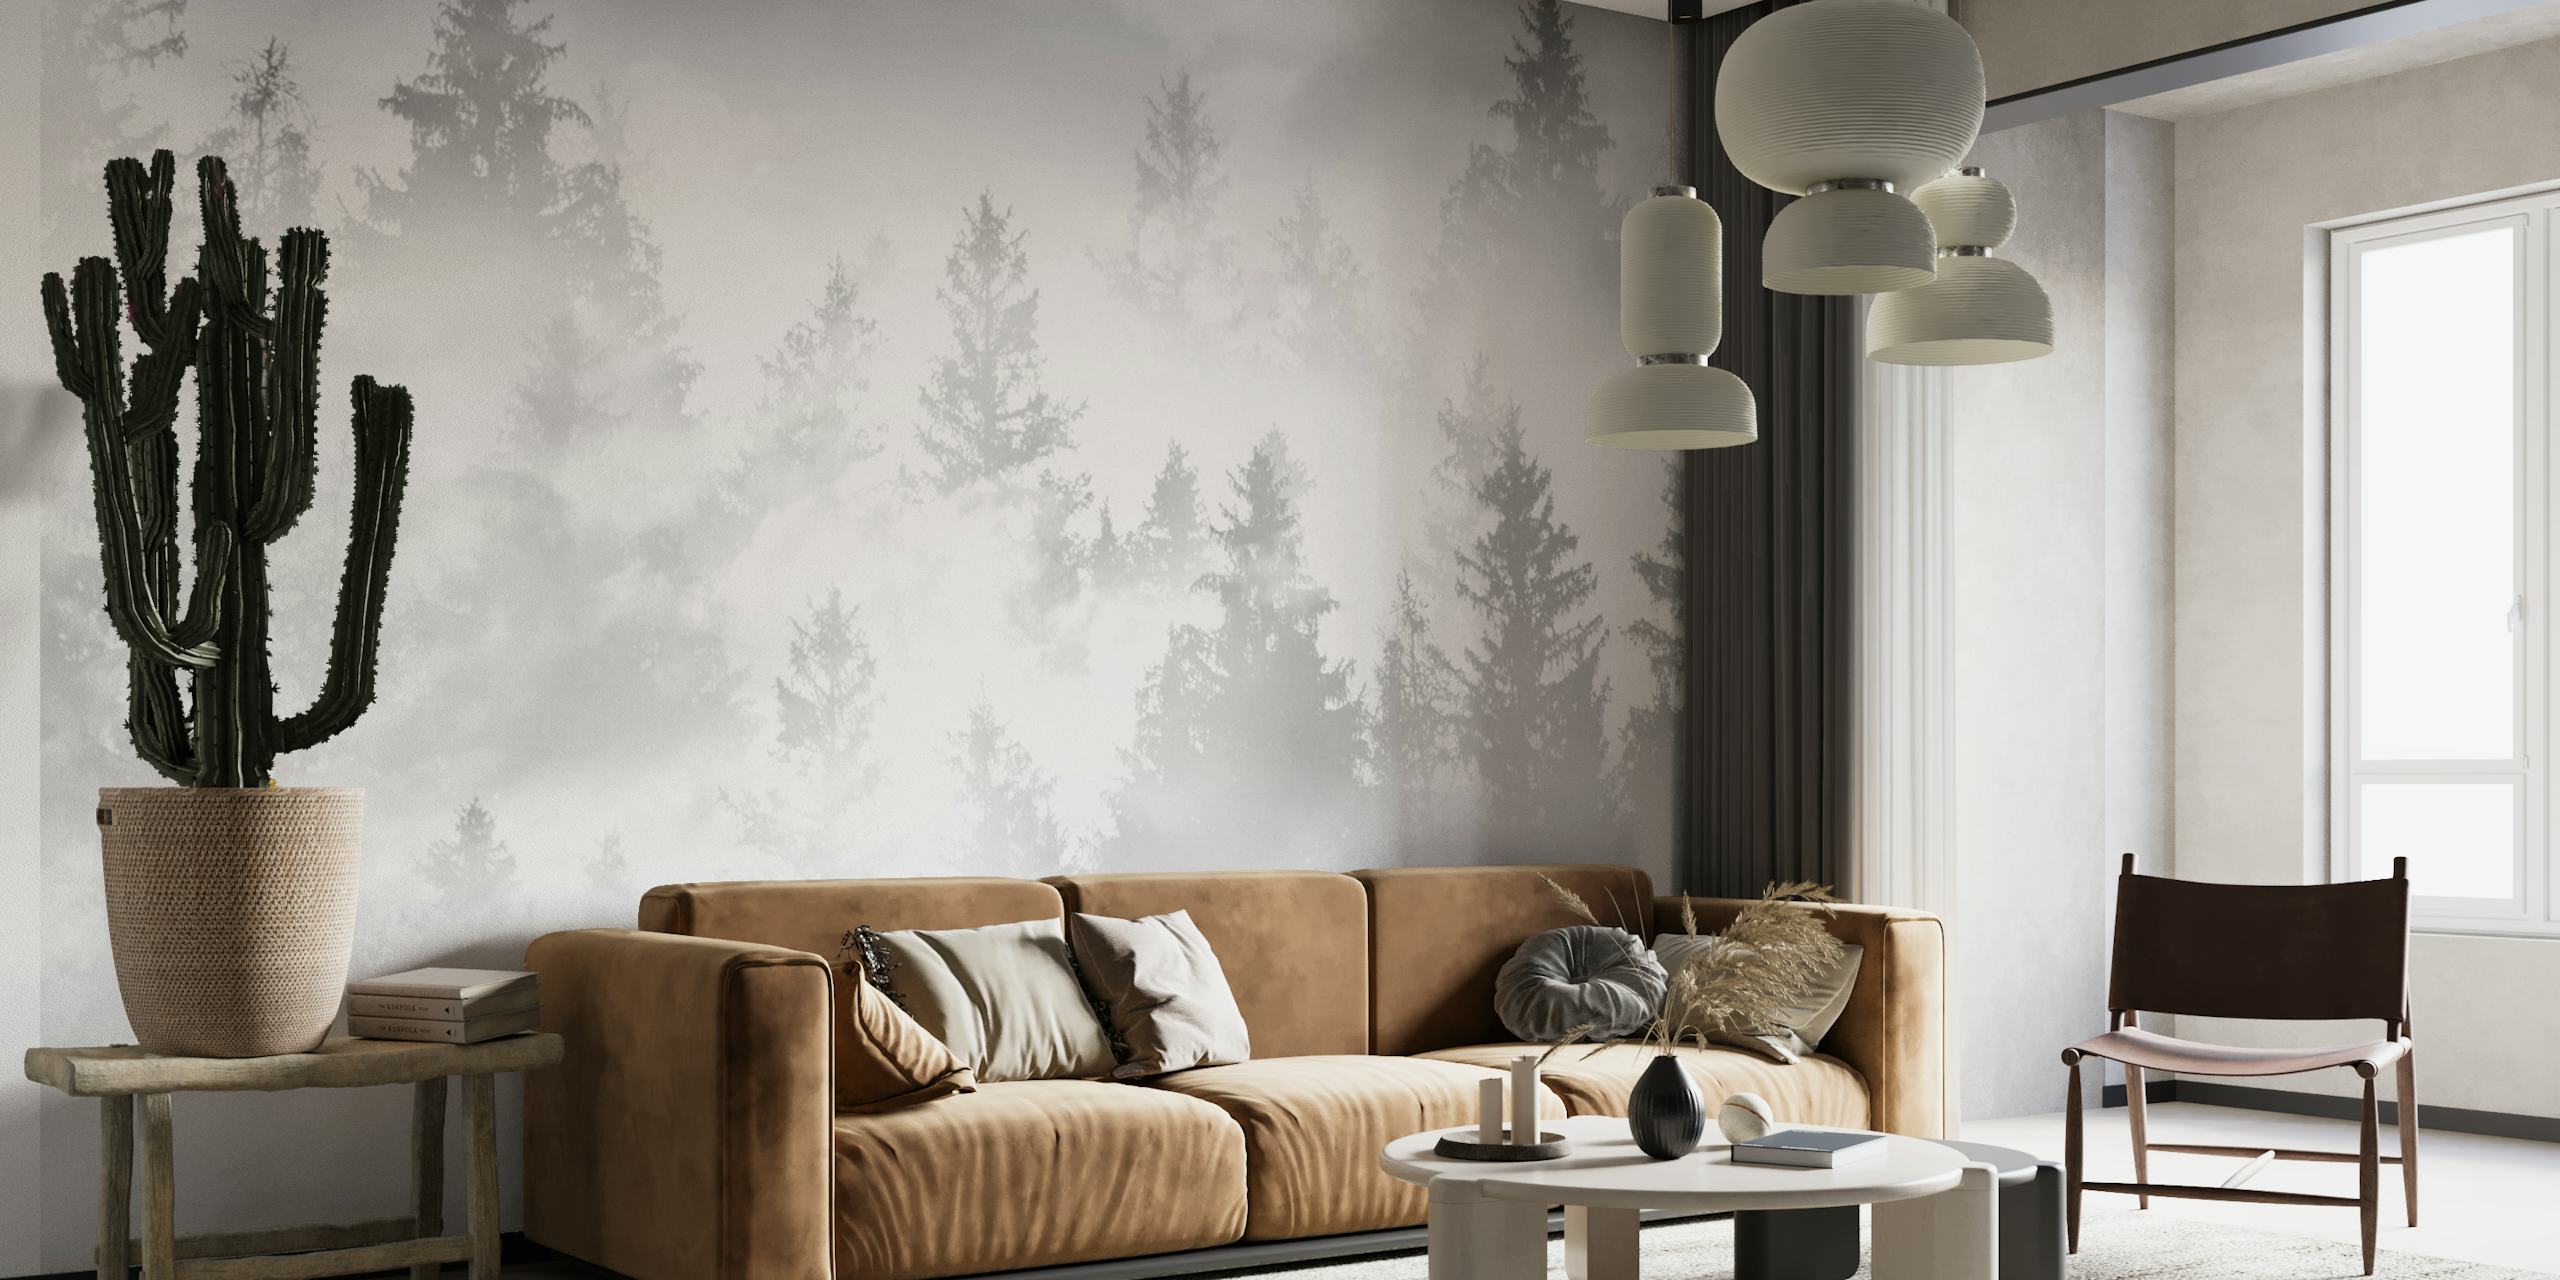 Misty forest wall mural in soft gray and white tones.